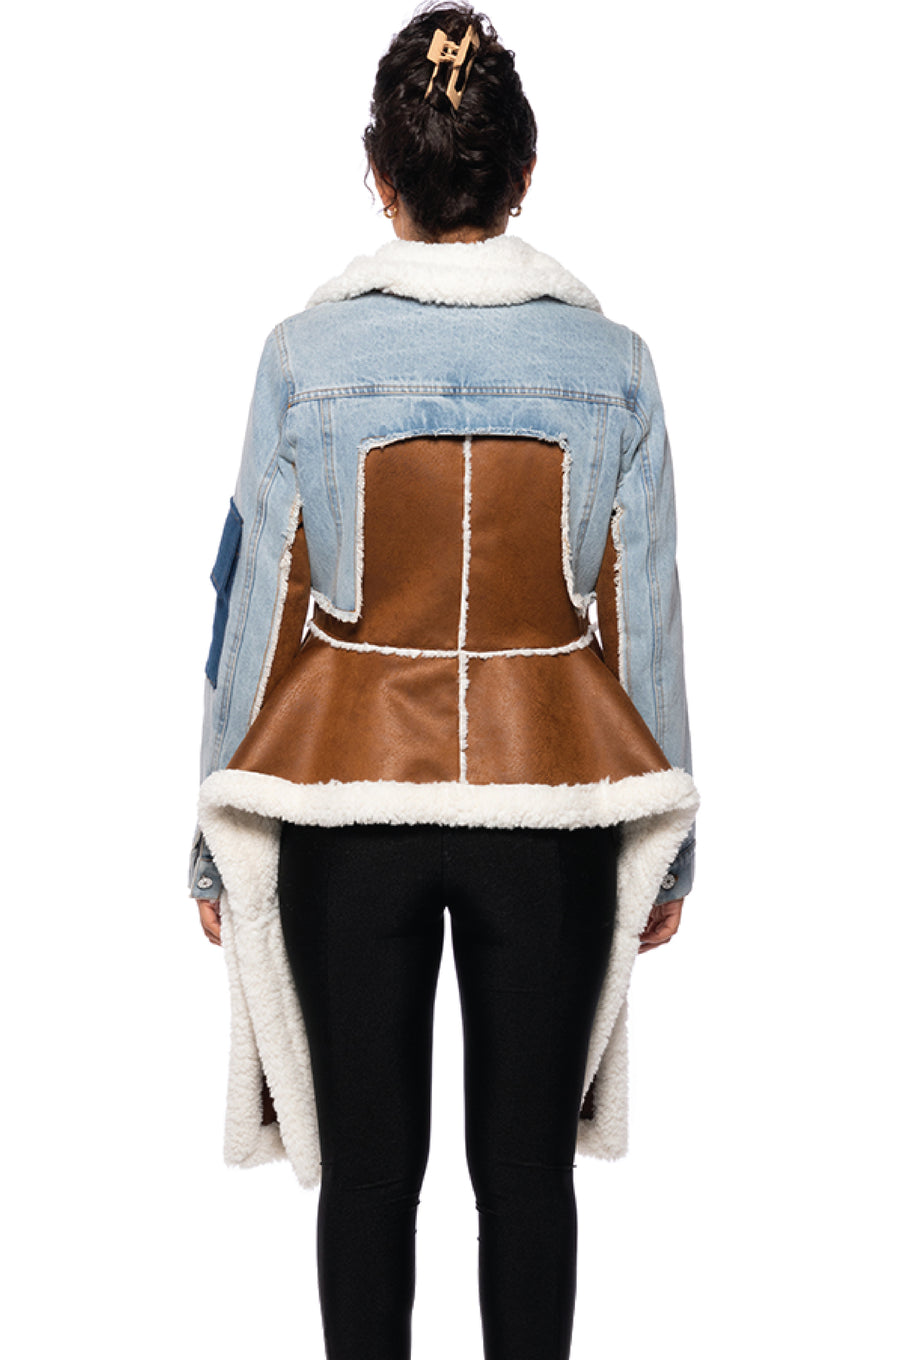 back view of asymmetric cut shearling jacket with denim jacket style sleeves and a shearling collar